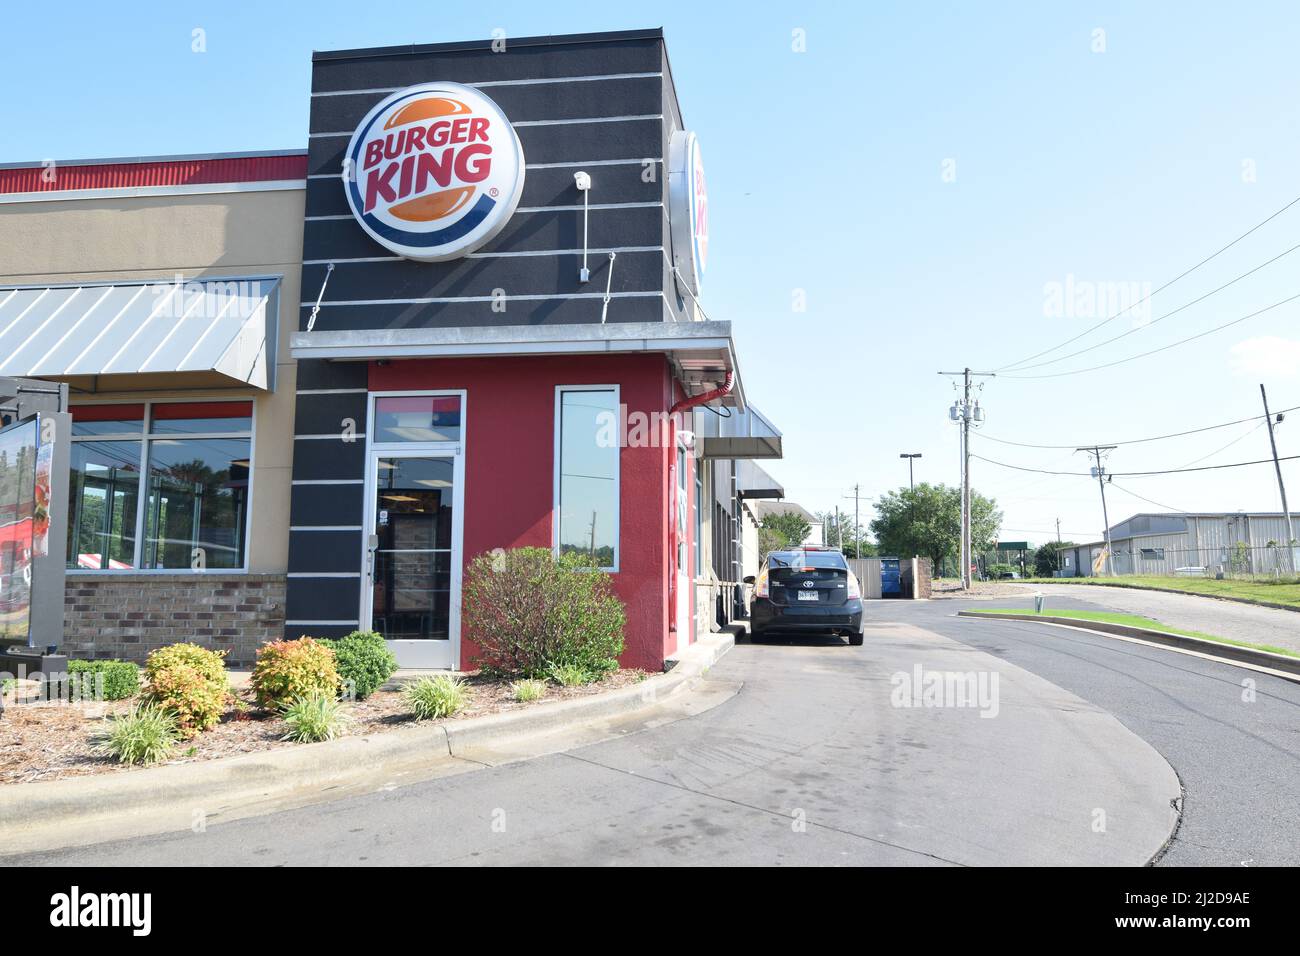 Customer waits for their food in a Burger King drive thru in Rockport, Arkansas Stock Photo